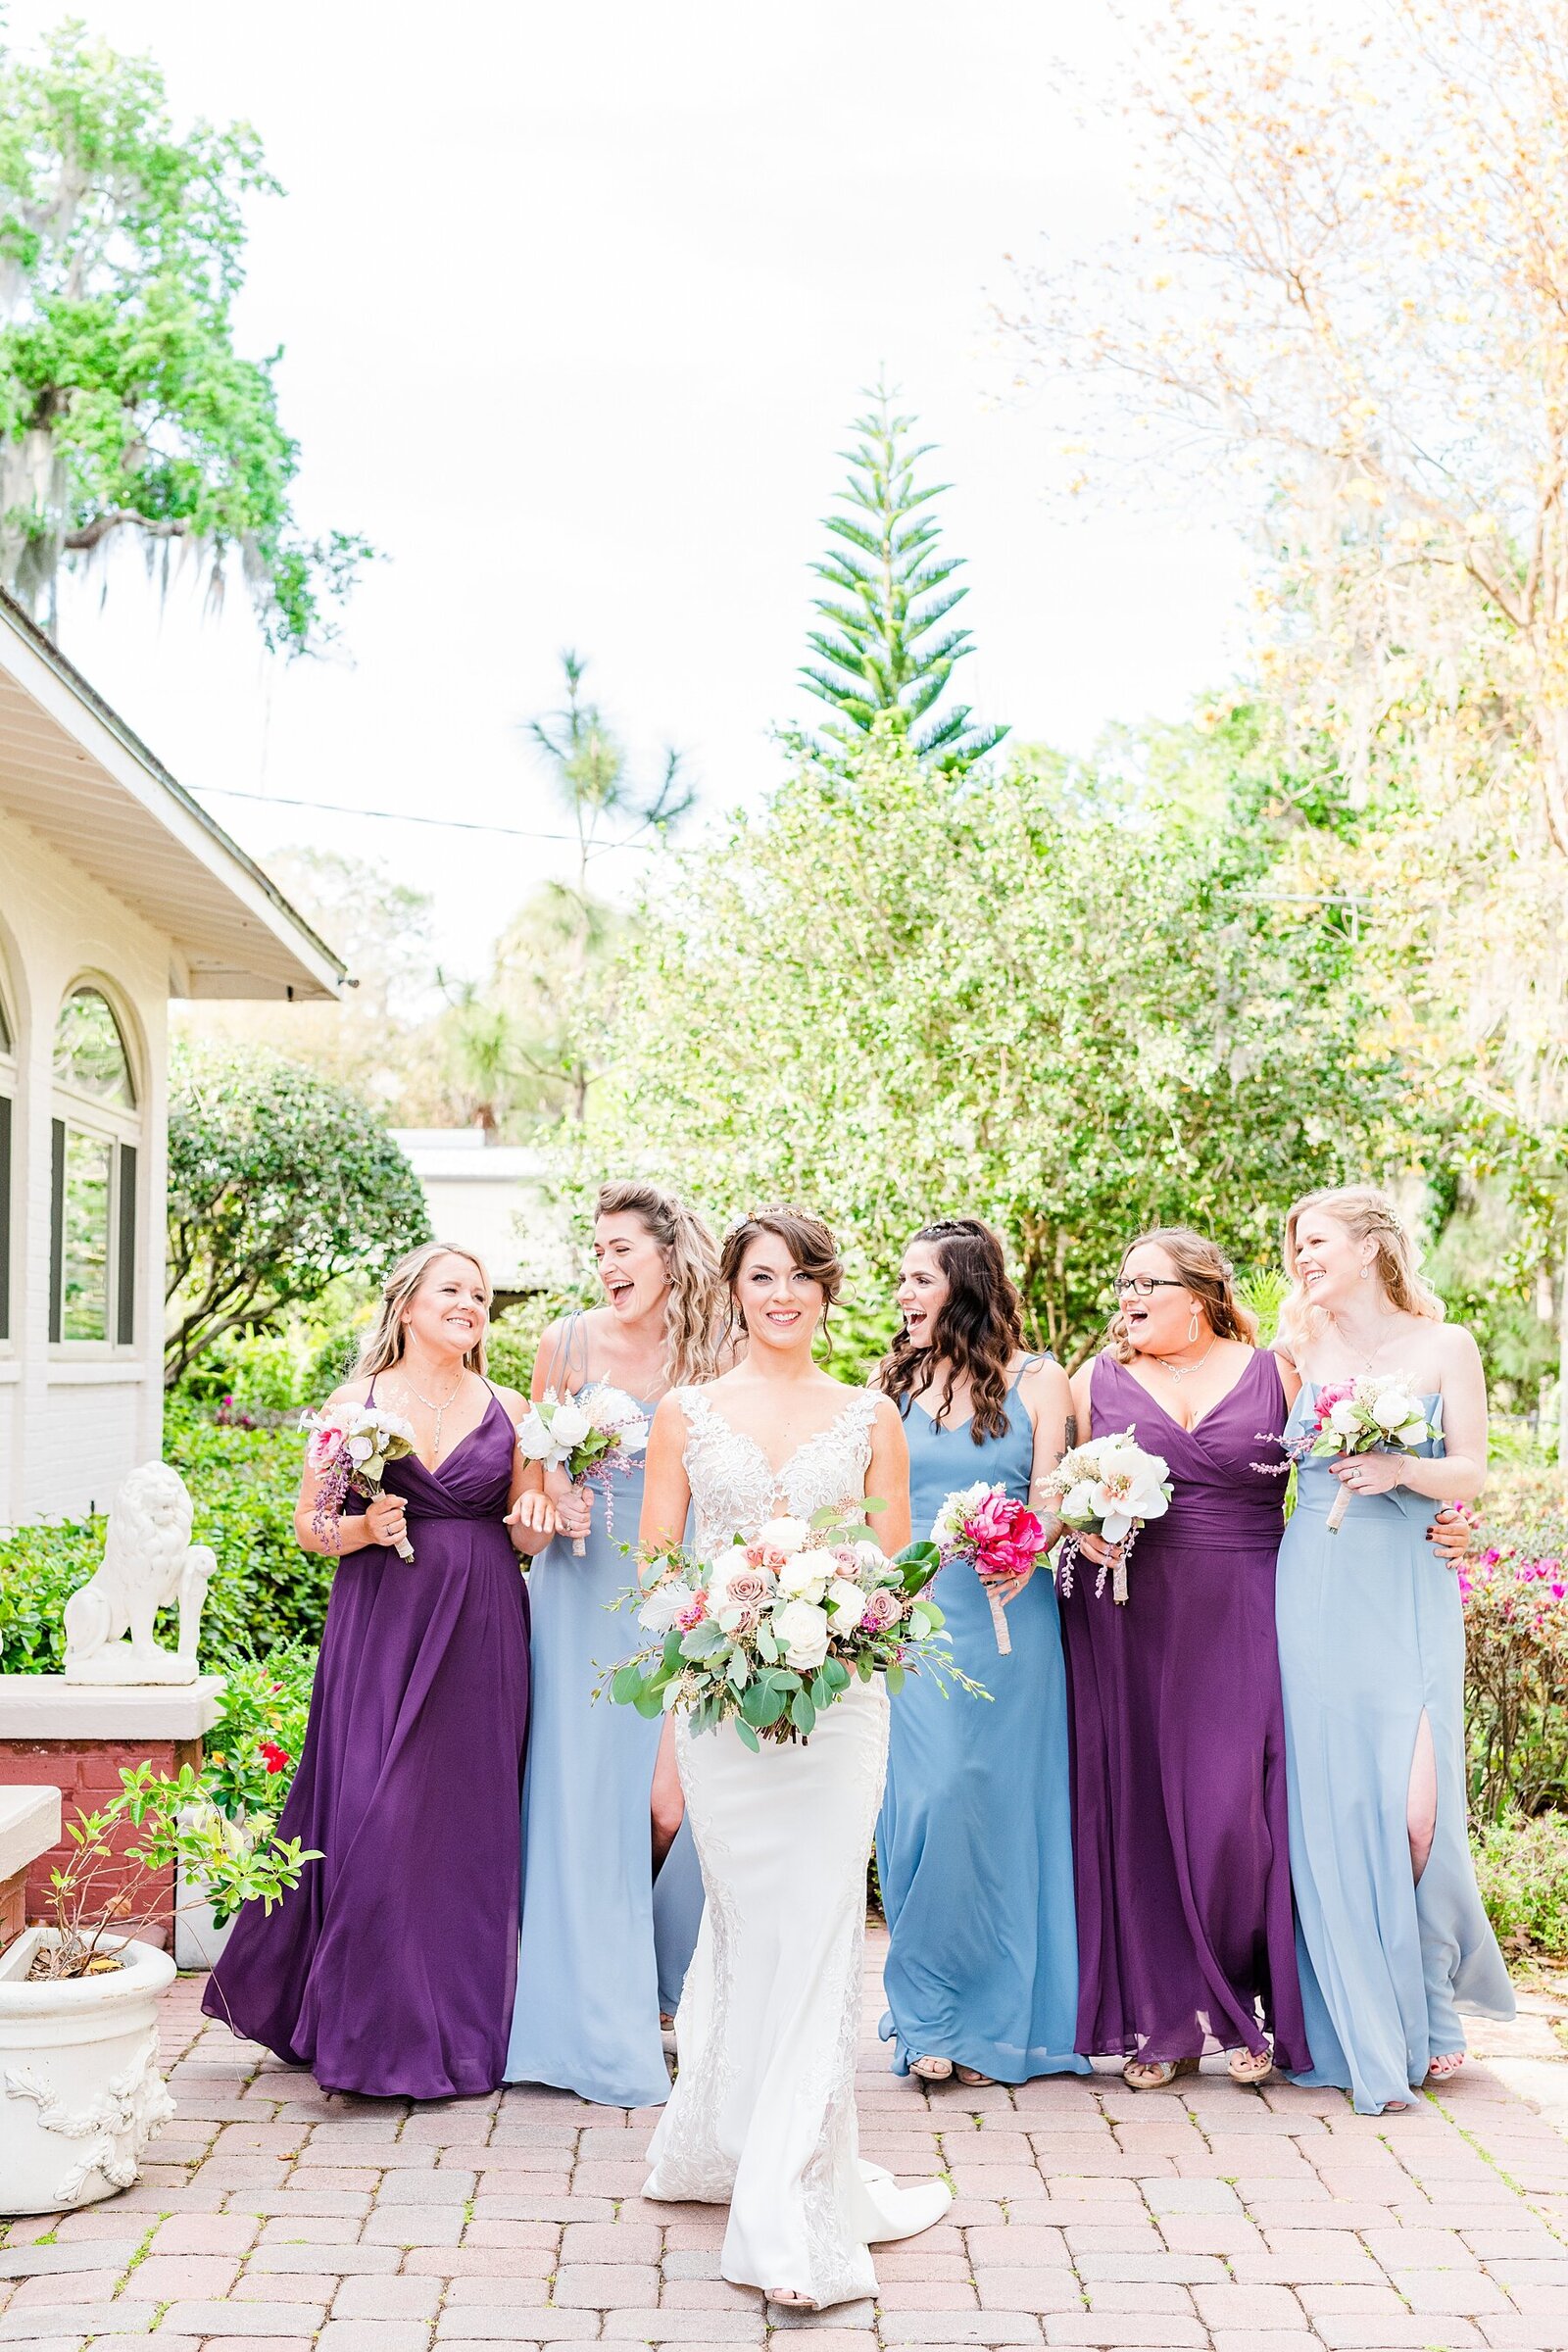 Bridal Party photos | Town Manor | Chynna Pacheco Photography